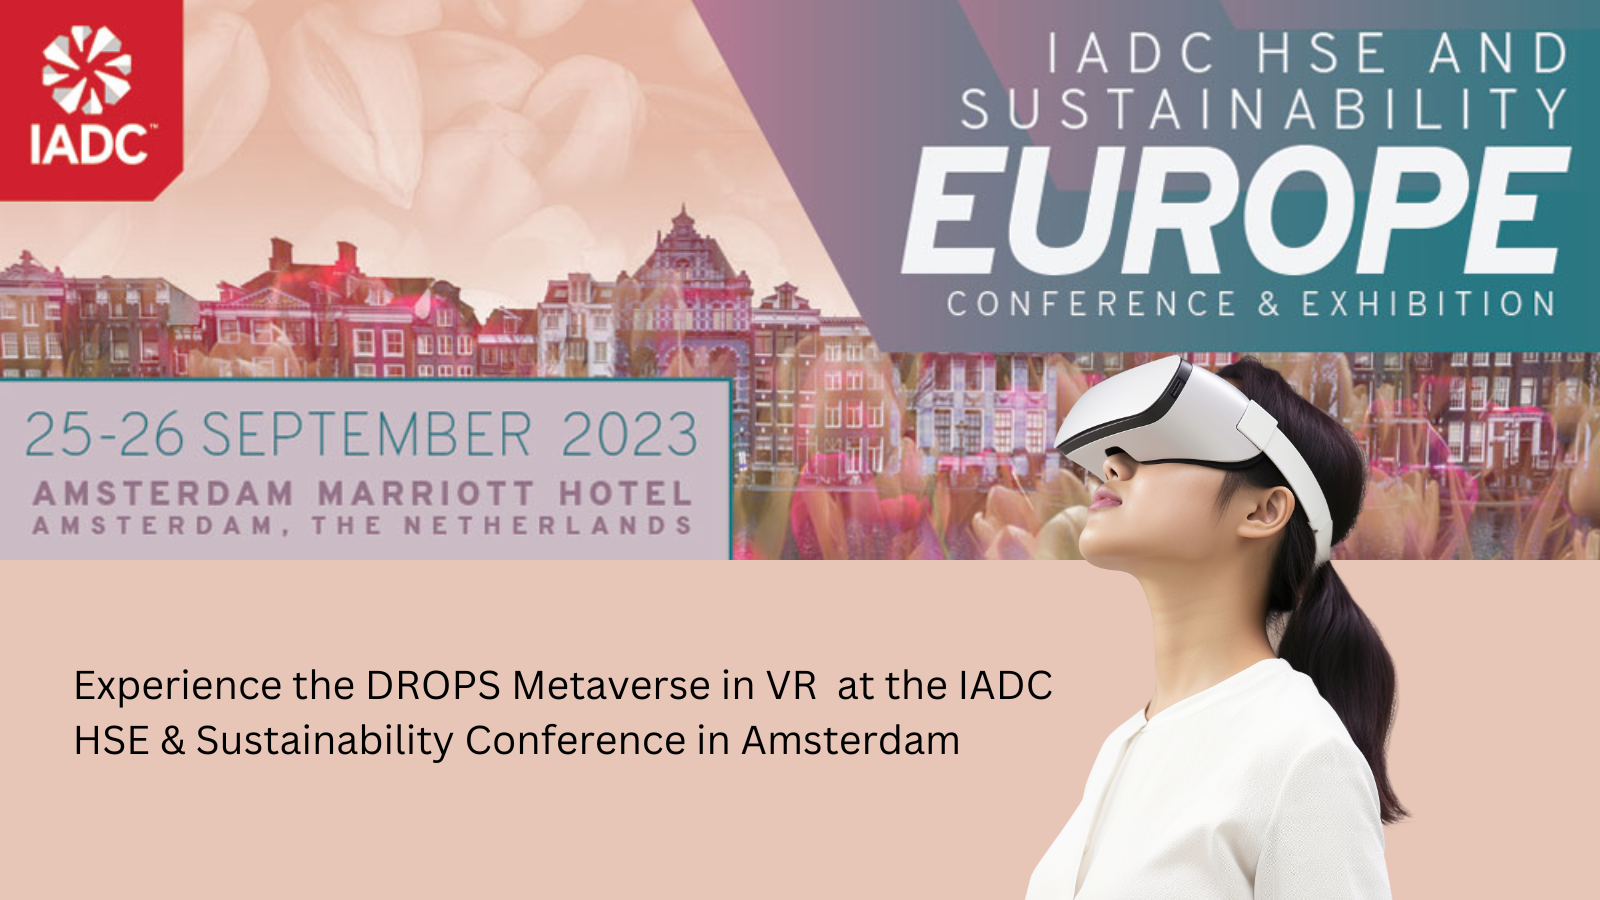 Experience the DROPS Metaverse at the IADC HSE & Sustainability Conference